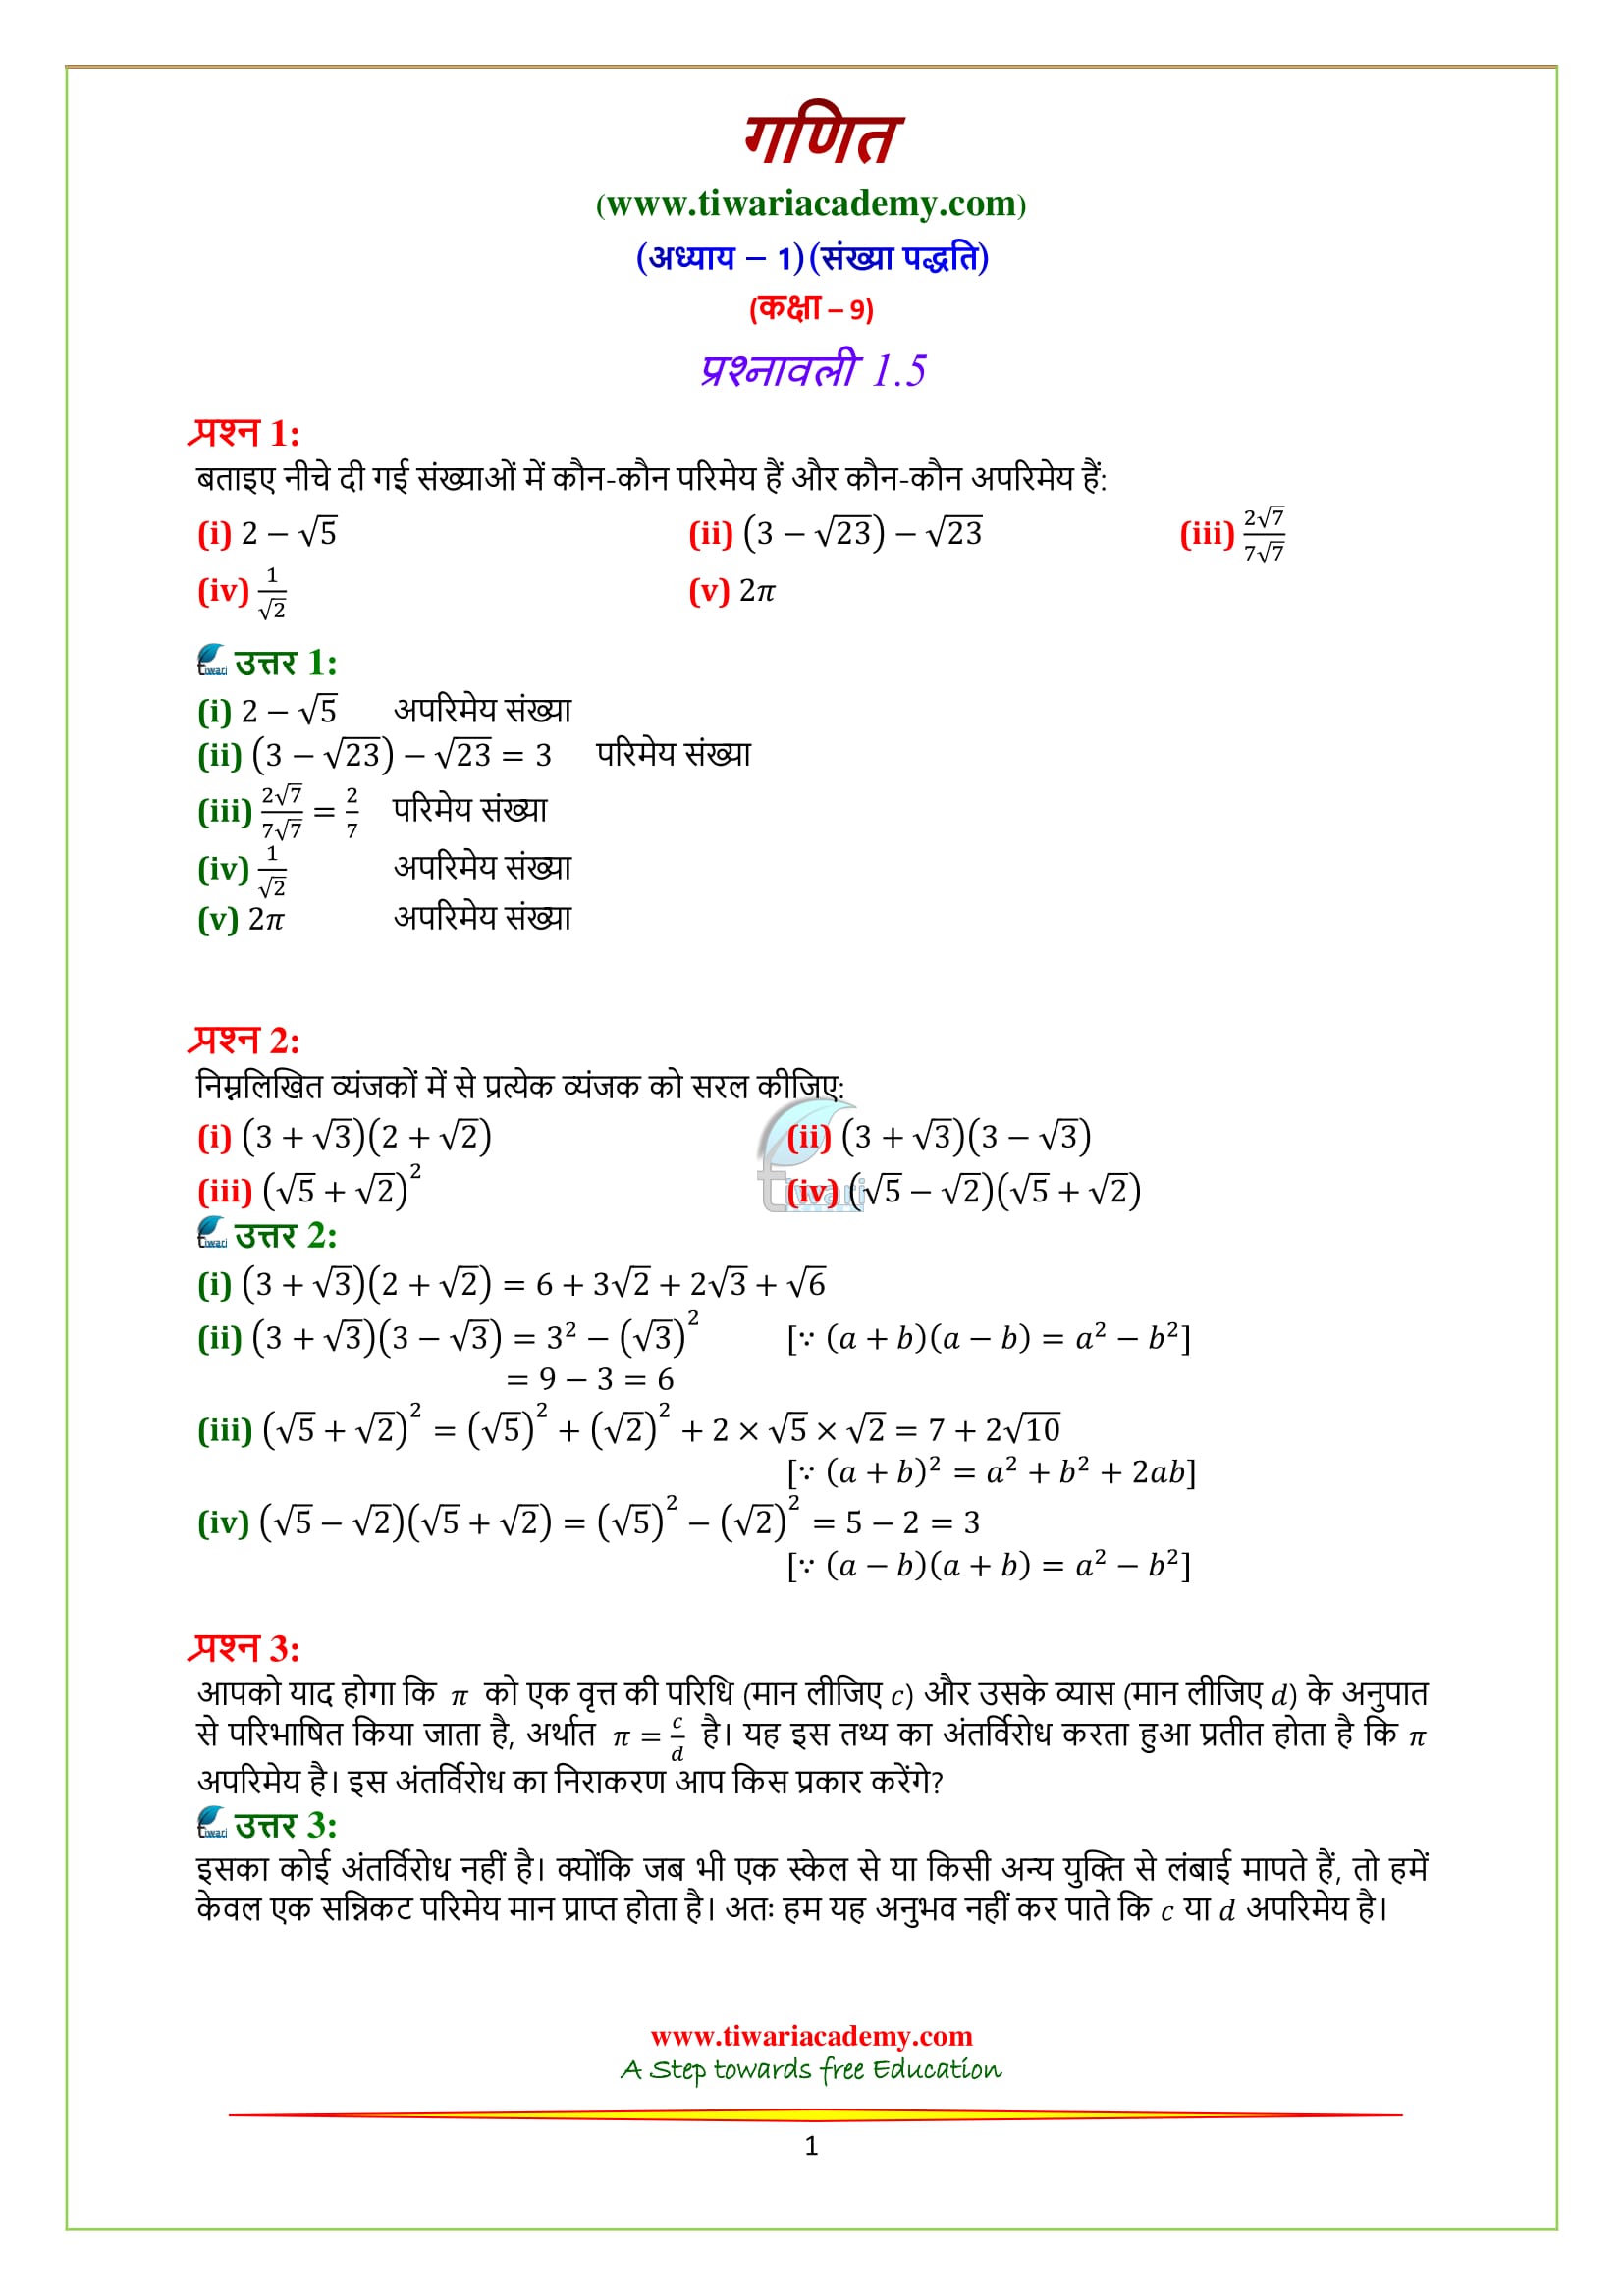 NCERT Solutions for Class 9 Chapter 1 Exercise 1.5 Hindi Medium